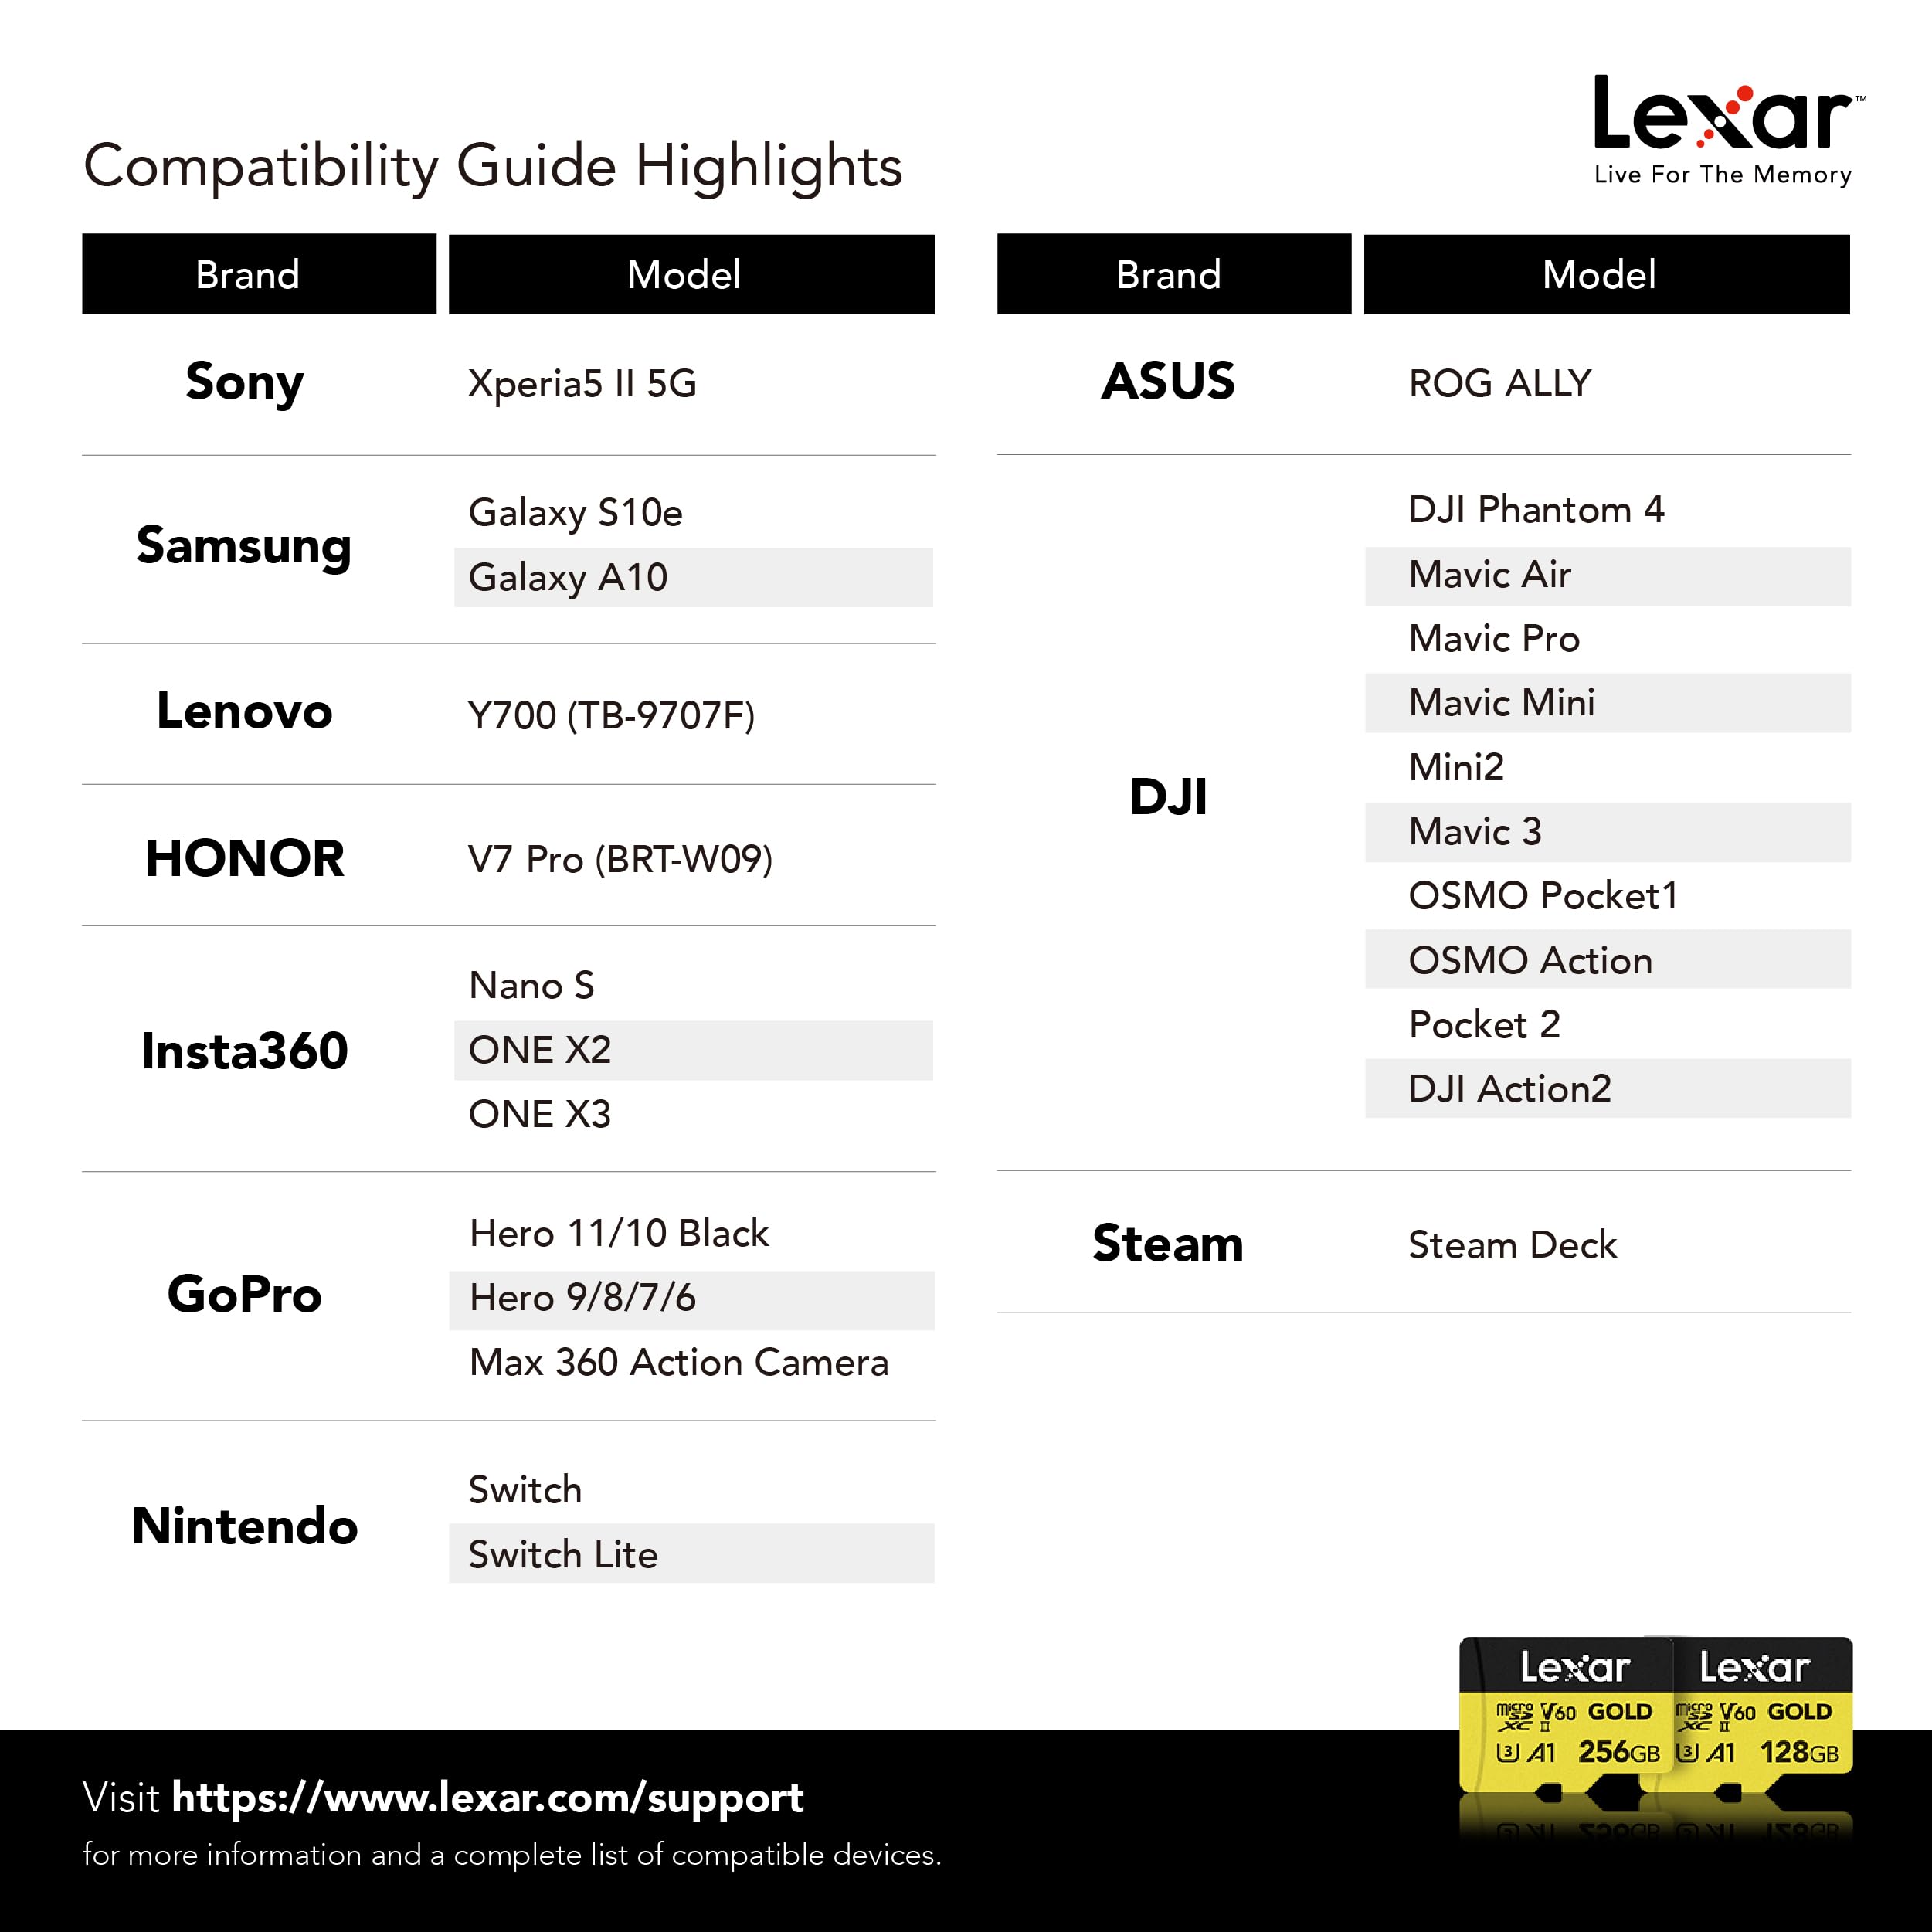 Lexar Professional Gold 128GB microSDXC UHS-II Card, C10, U3, V60, A1, Full HD, 4K UHD, Up to 280/180 MB/s, for Drones, Action Cameras, Portable Gaming Devices (LMSGOLD128G-BNNNG)